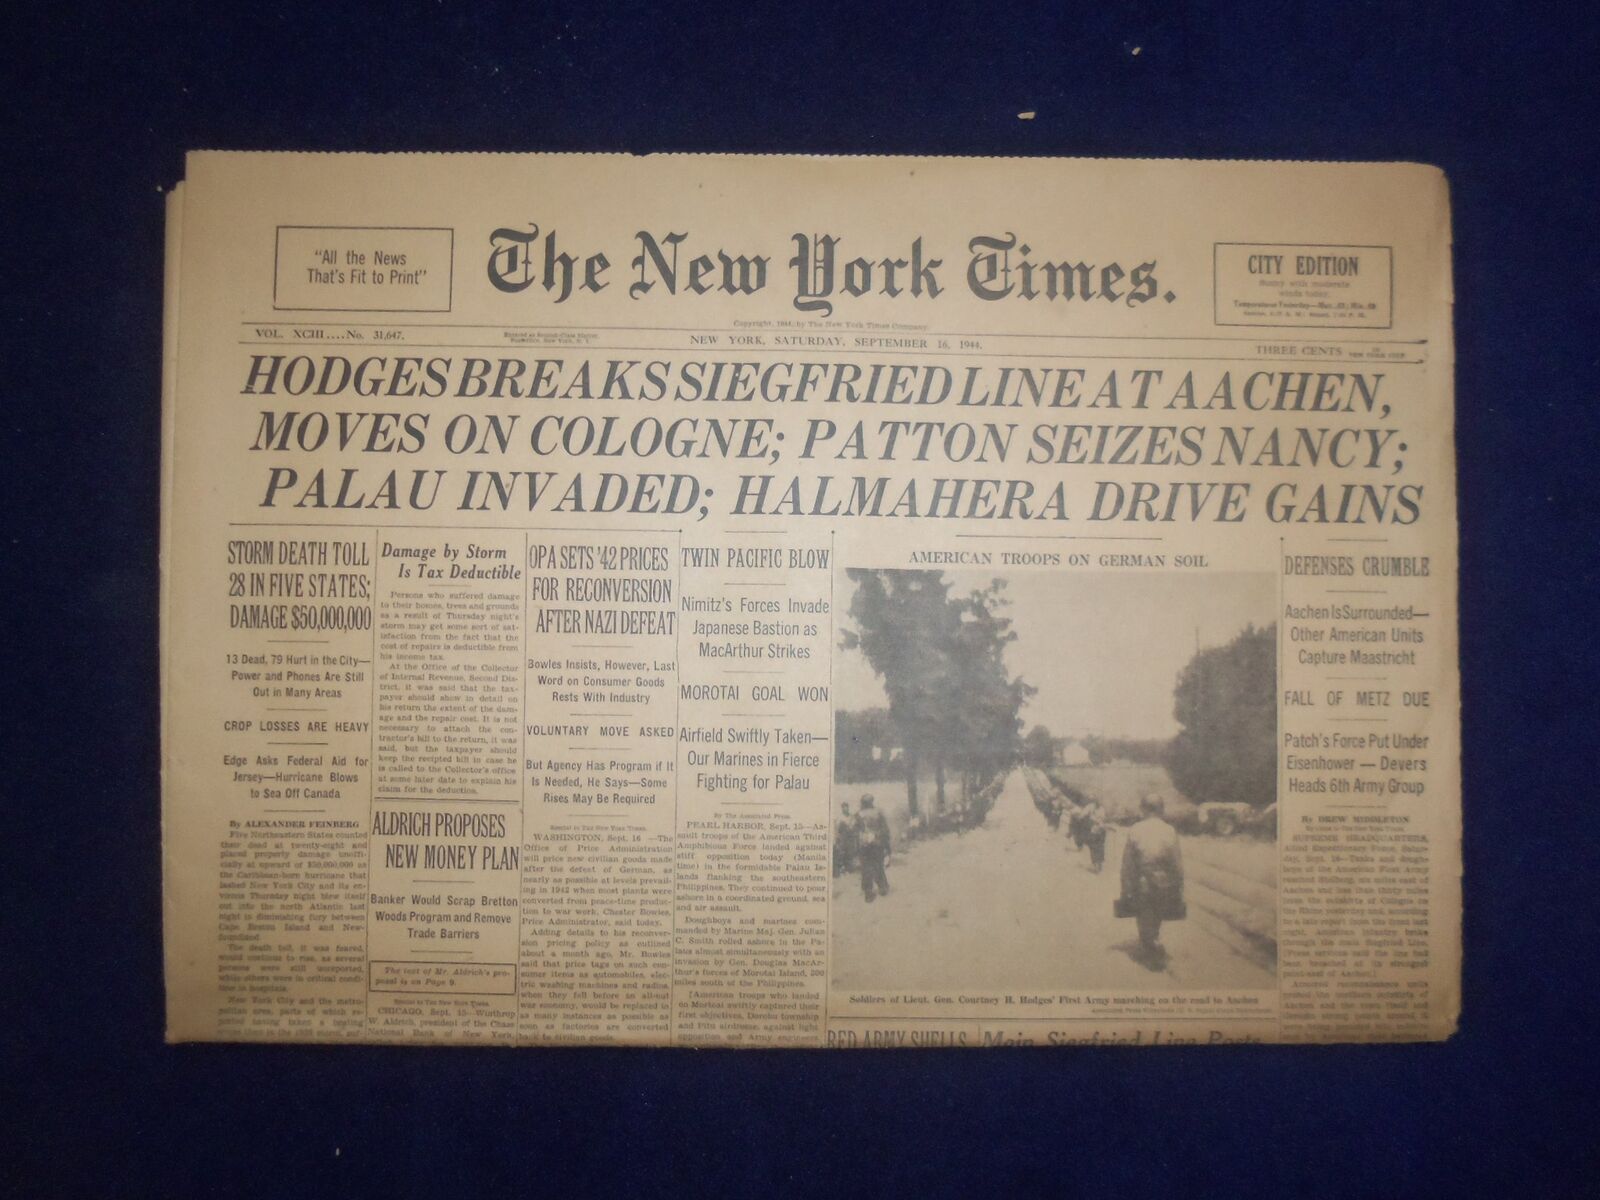 1944 SEP 16 NEW YORK TIMES - HODGES BREAKS SIEGFRIED LINE AT AACHEN - NP 6624